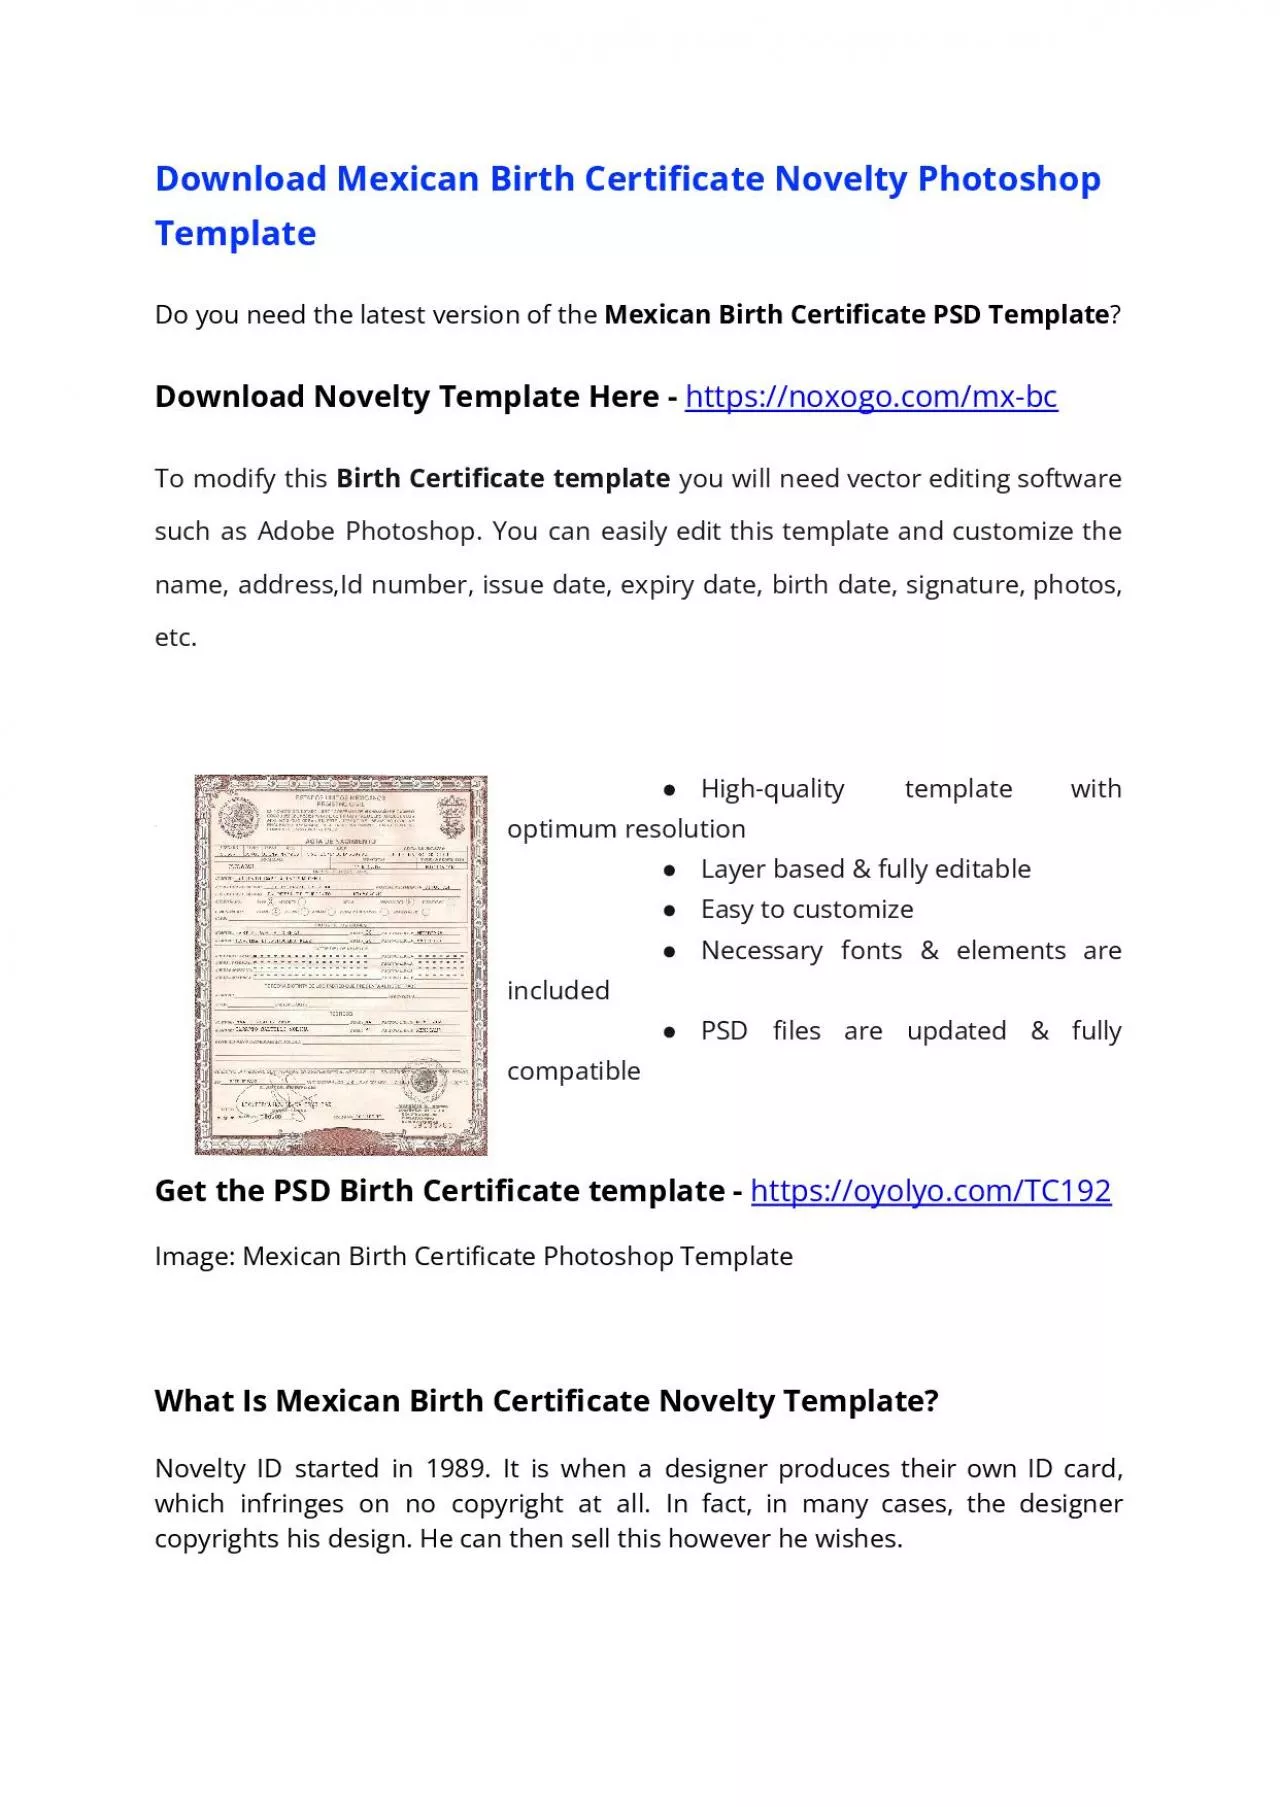 Mexican Birth Certificate PSD Template – Download Photoshop File